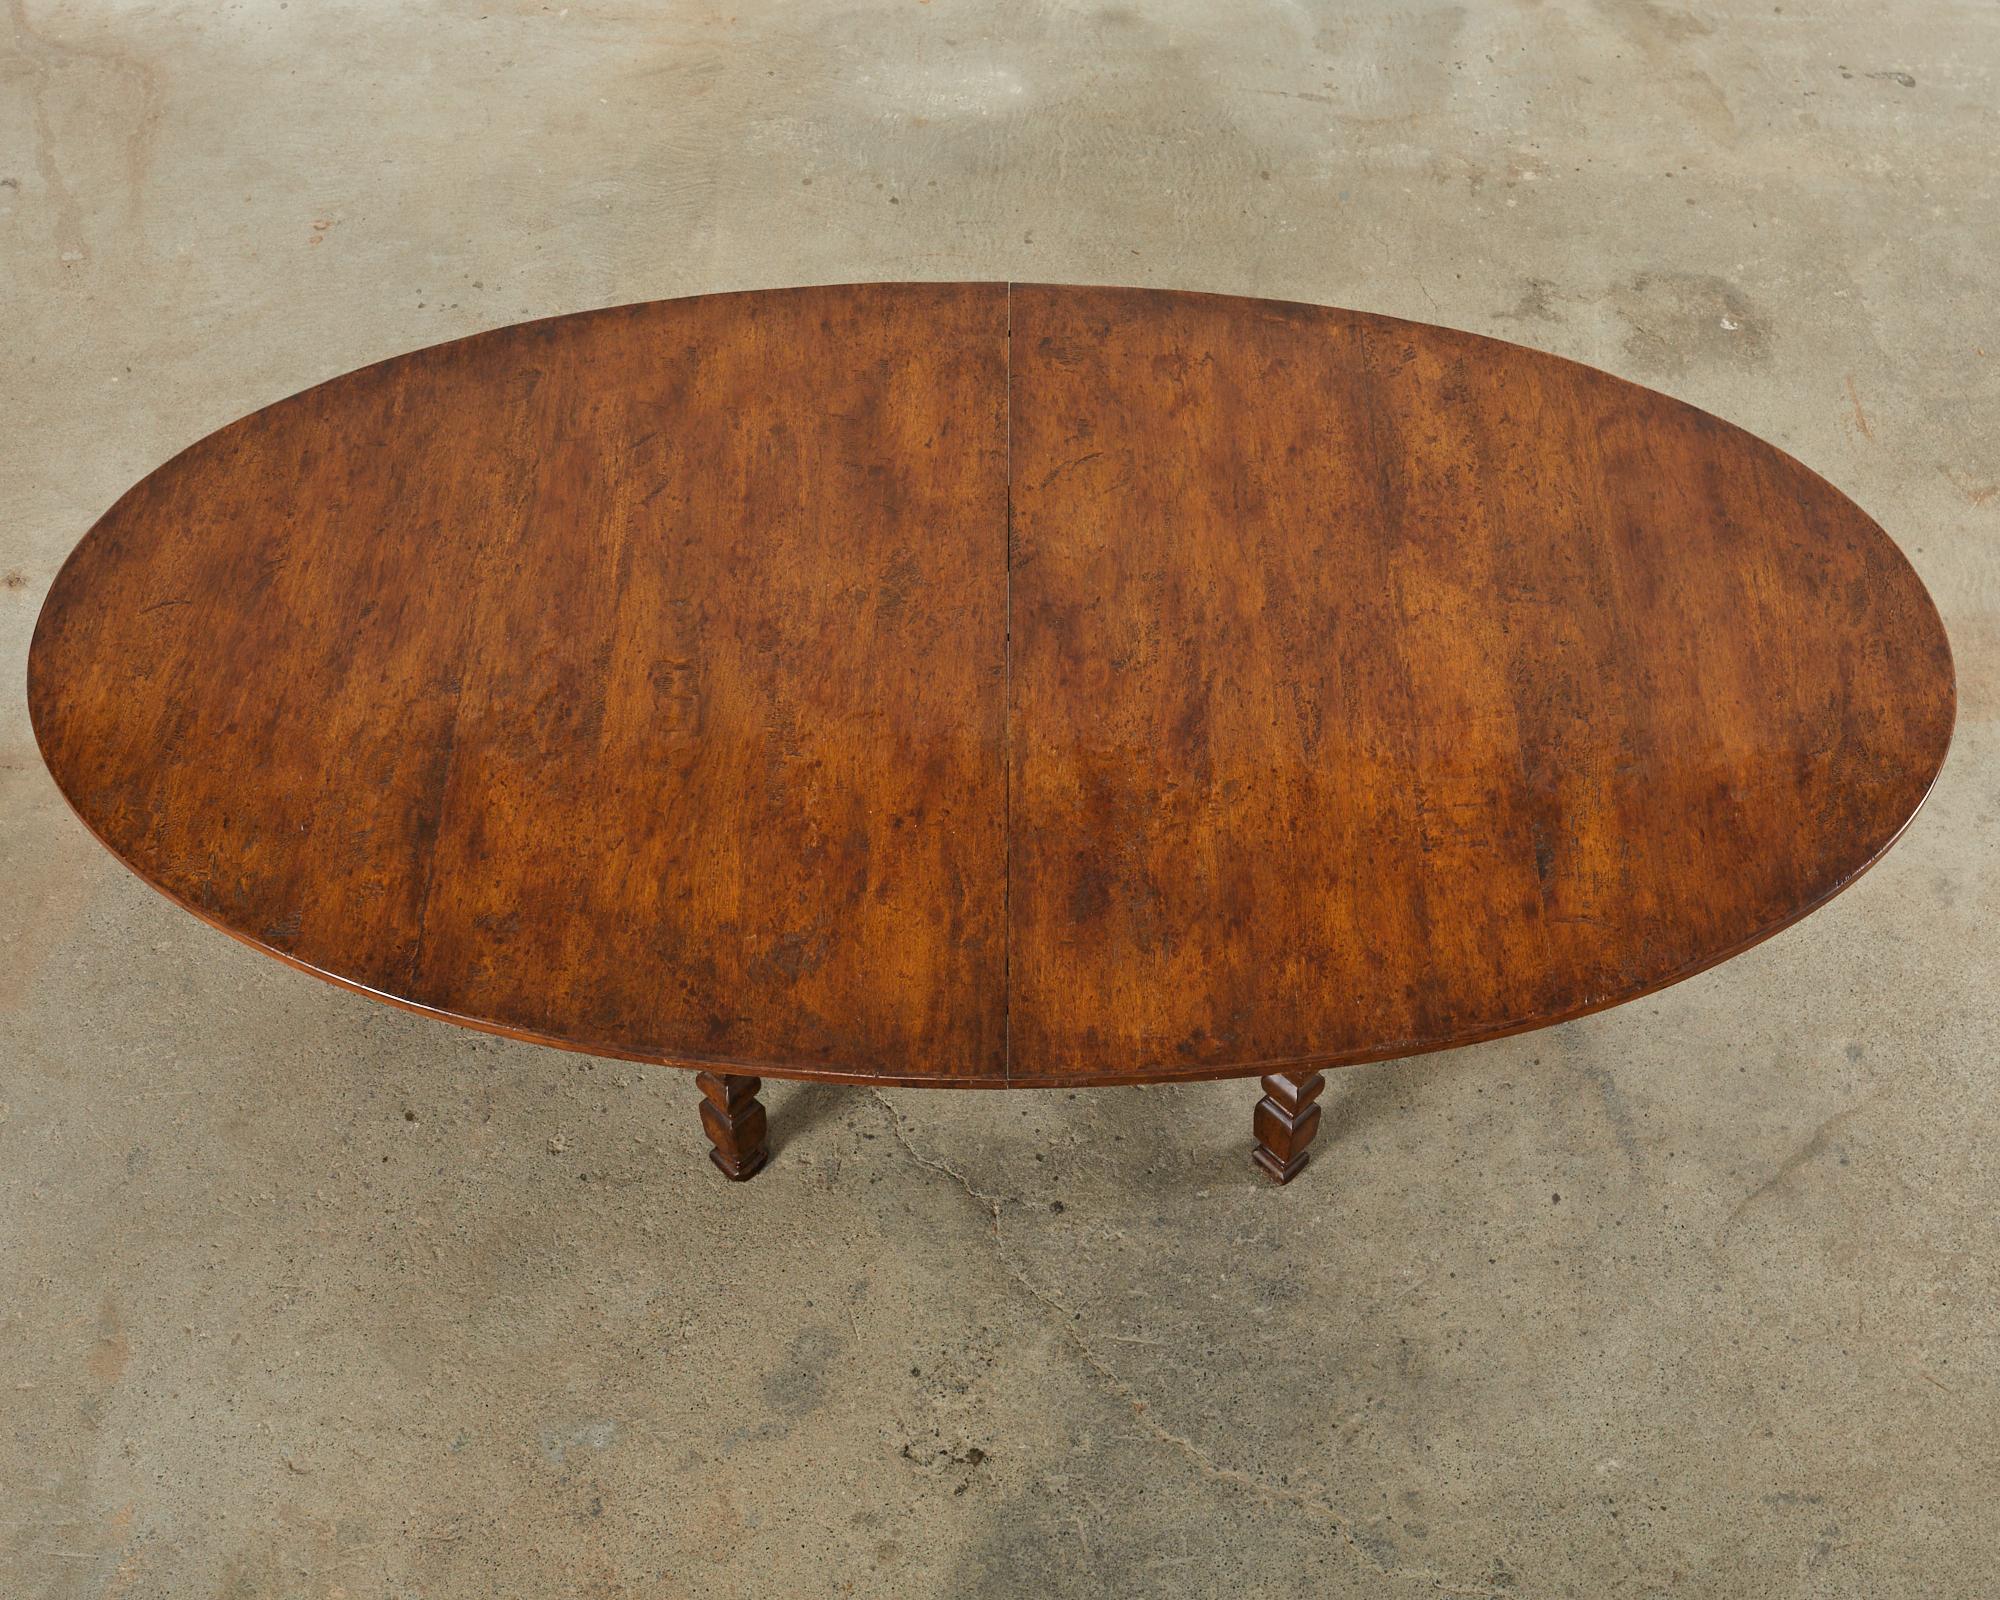 Hand-Crafted Dennis & Leen Spanish Baroque Style Walnut Dining Table